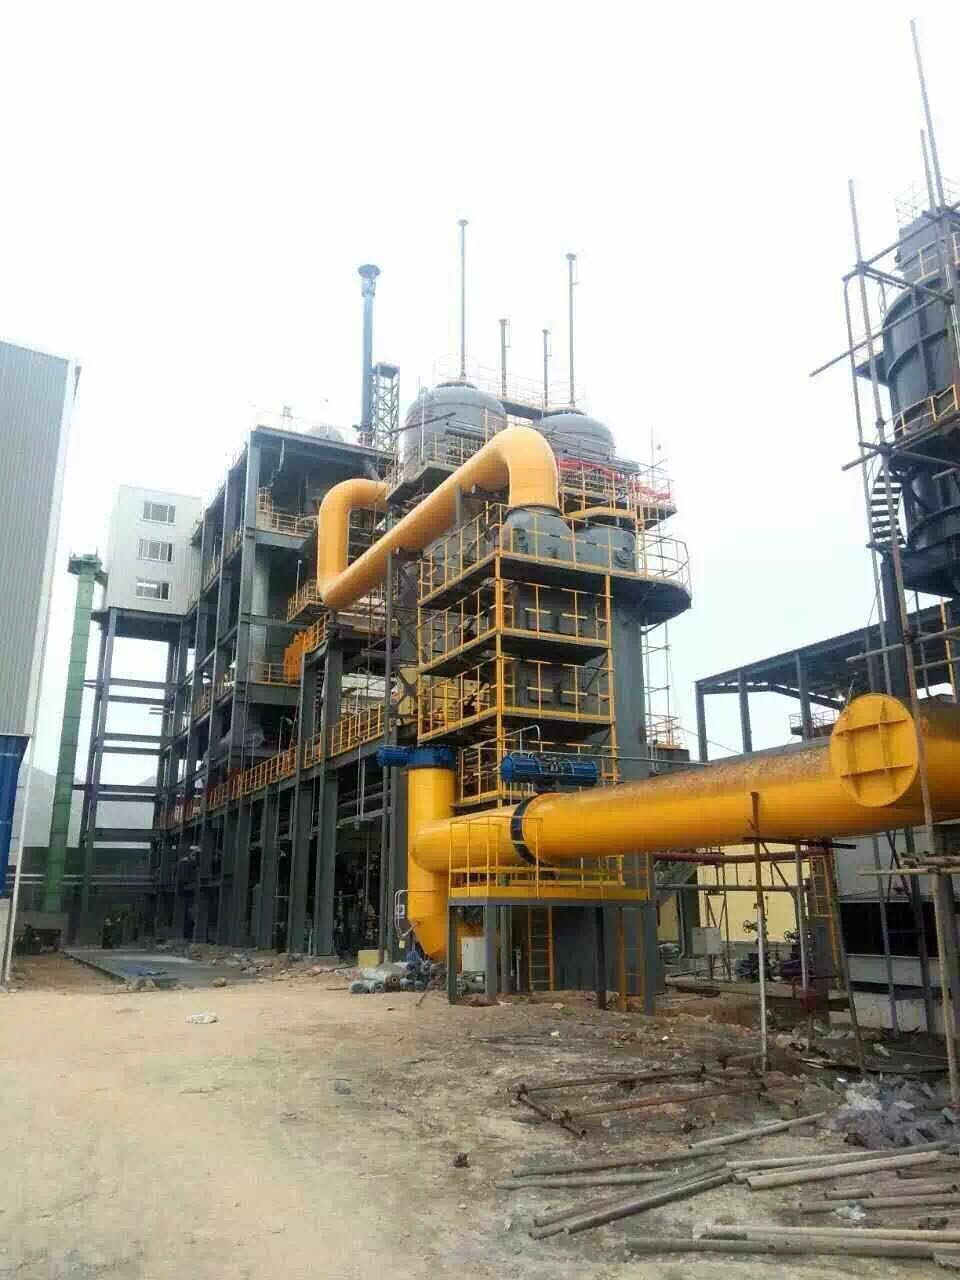 Shandong Zhaojin chloridizing roasting project——CXL2000 circulating fluidized bed gasifier project put into operation